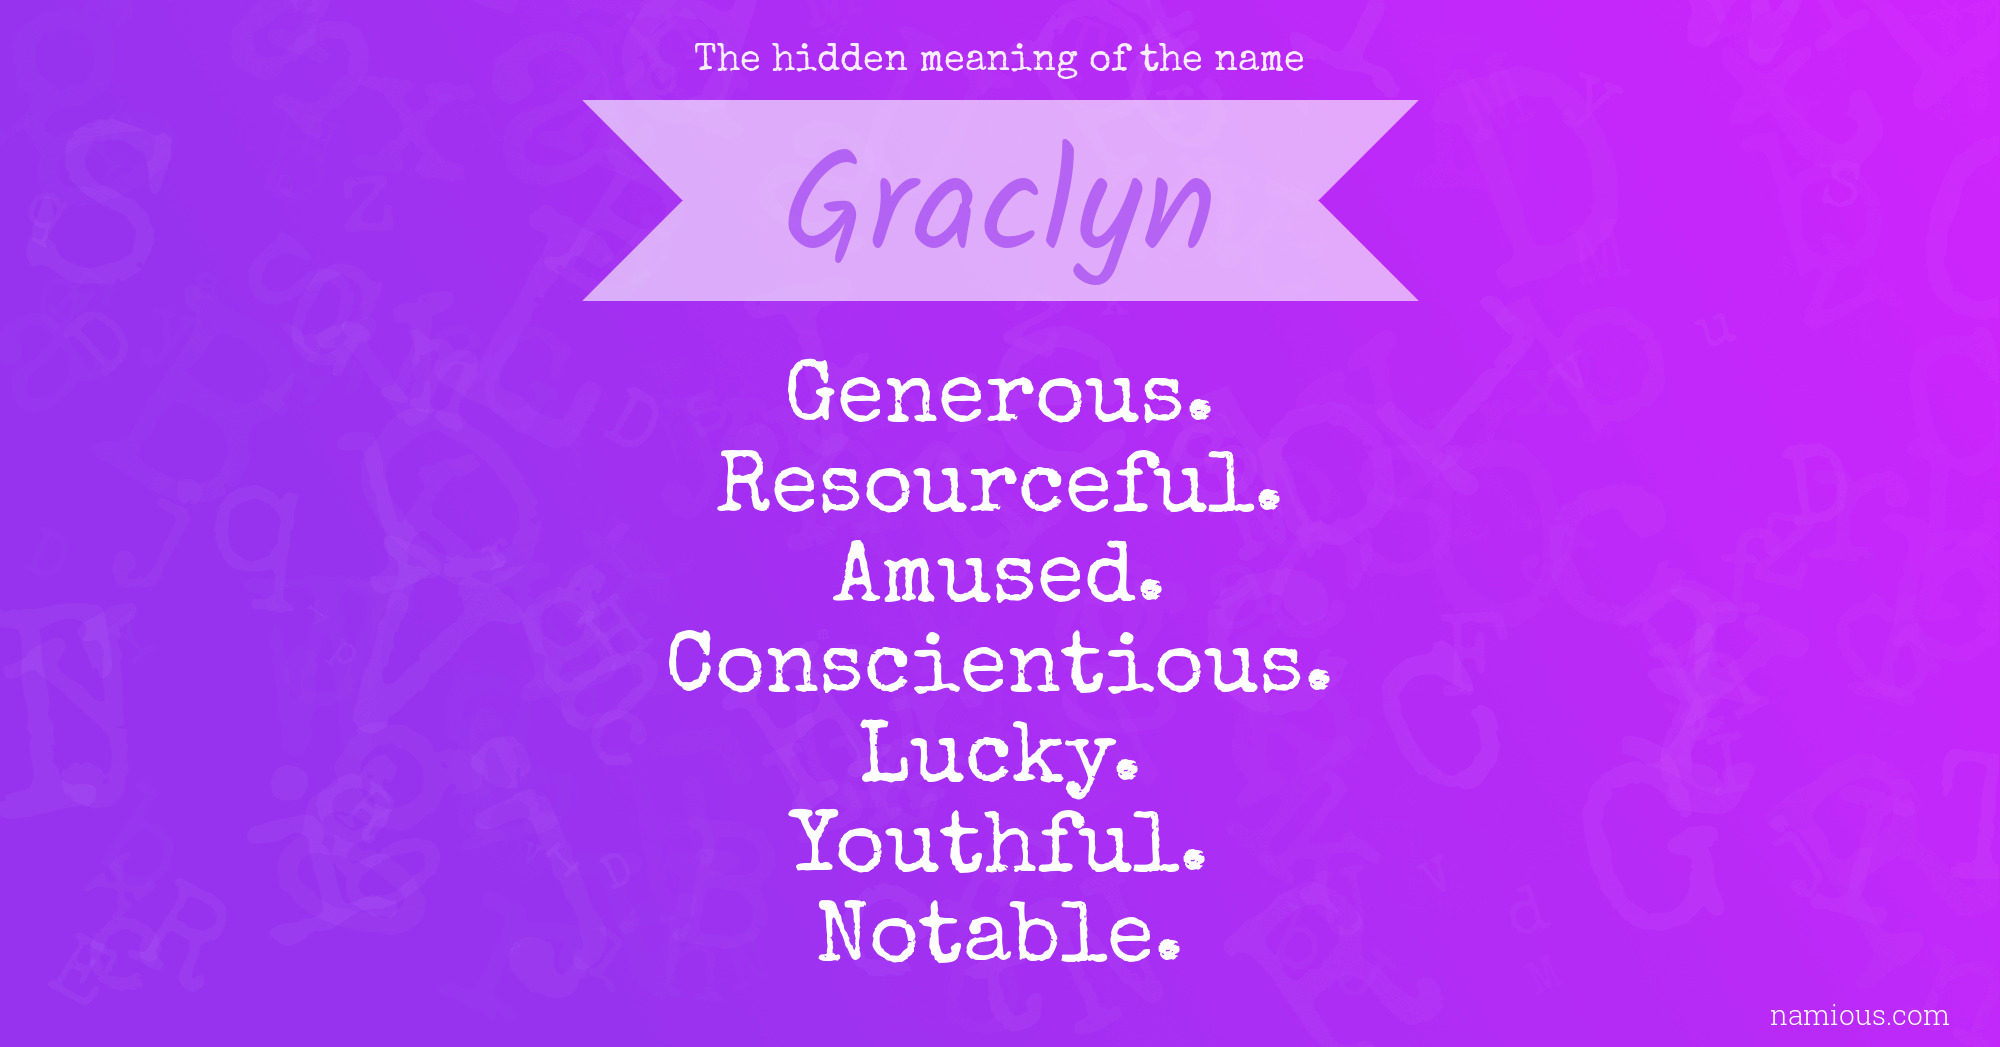 The hidden meaning of the name Graclyn